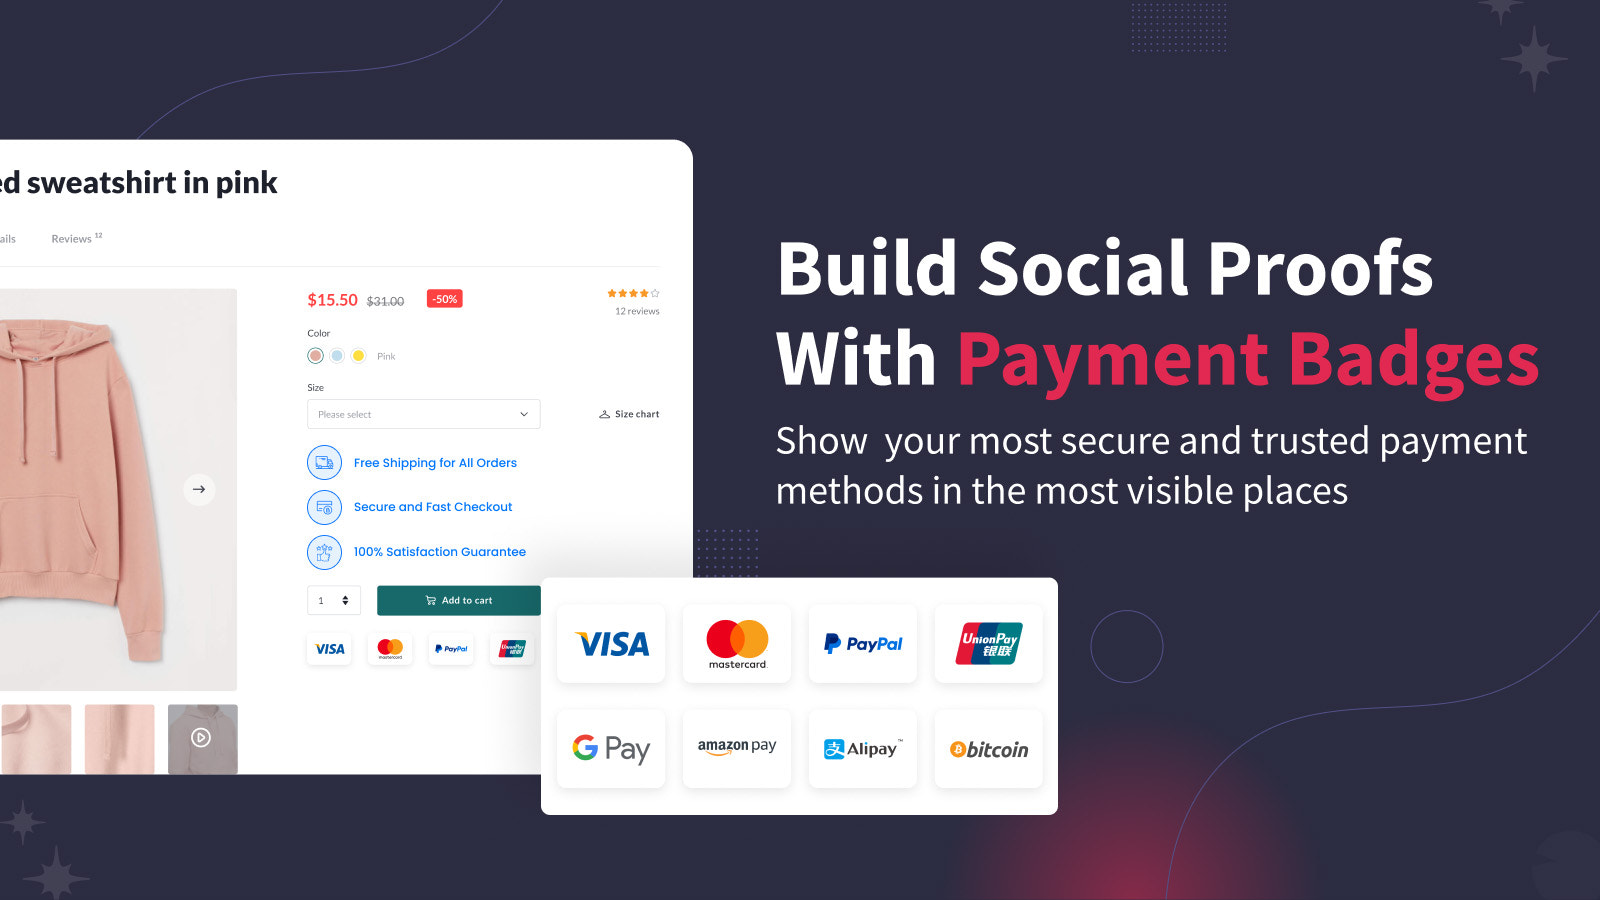 Build Social Proofs With Payment Badges